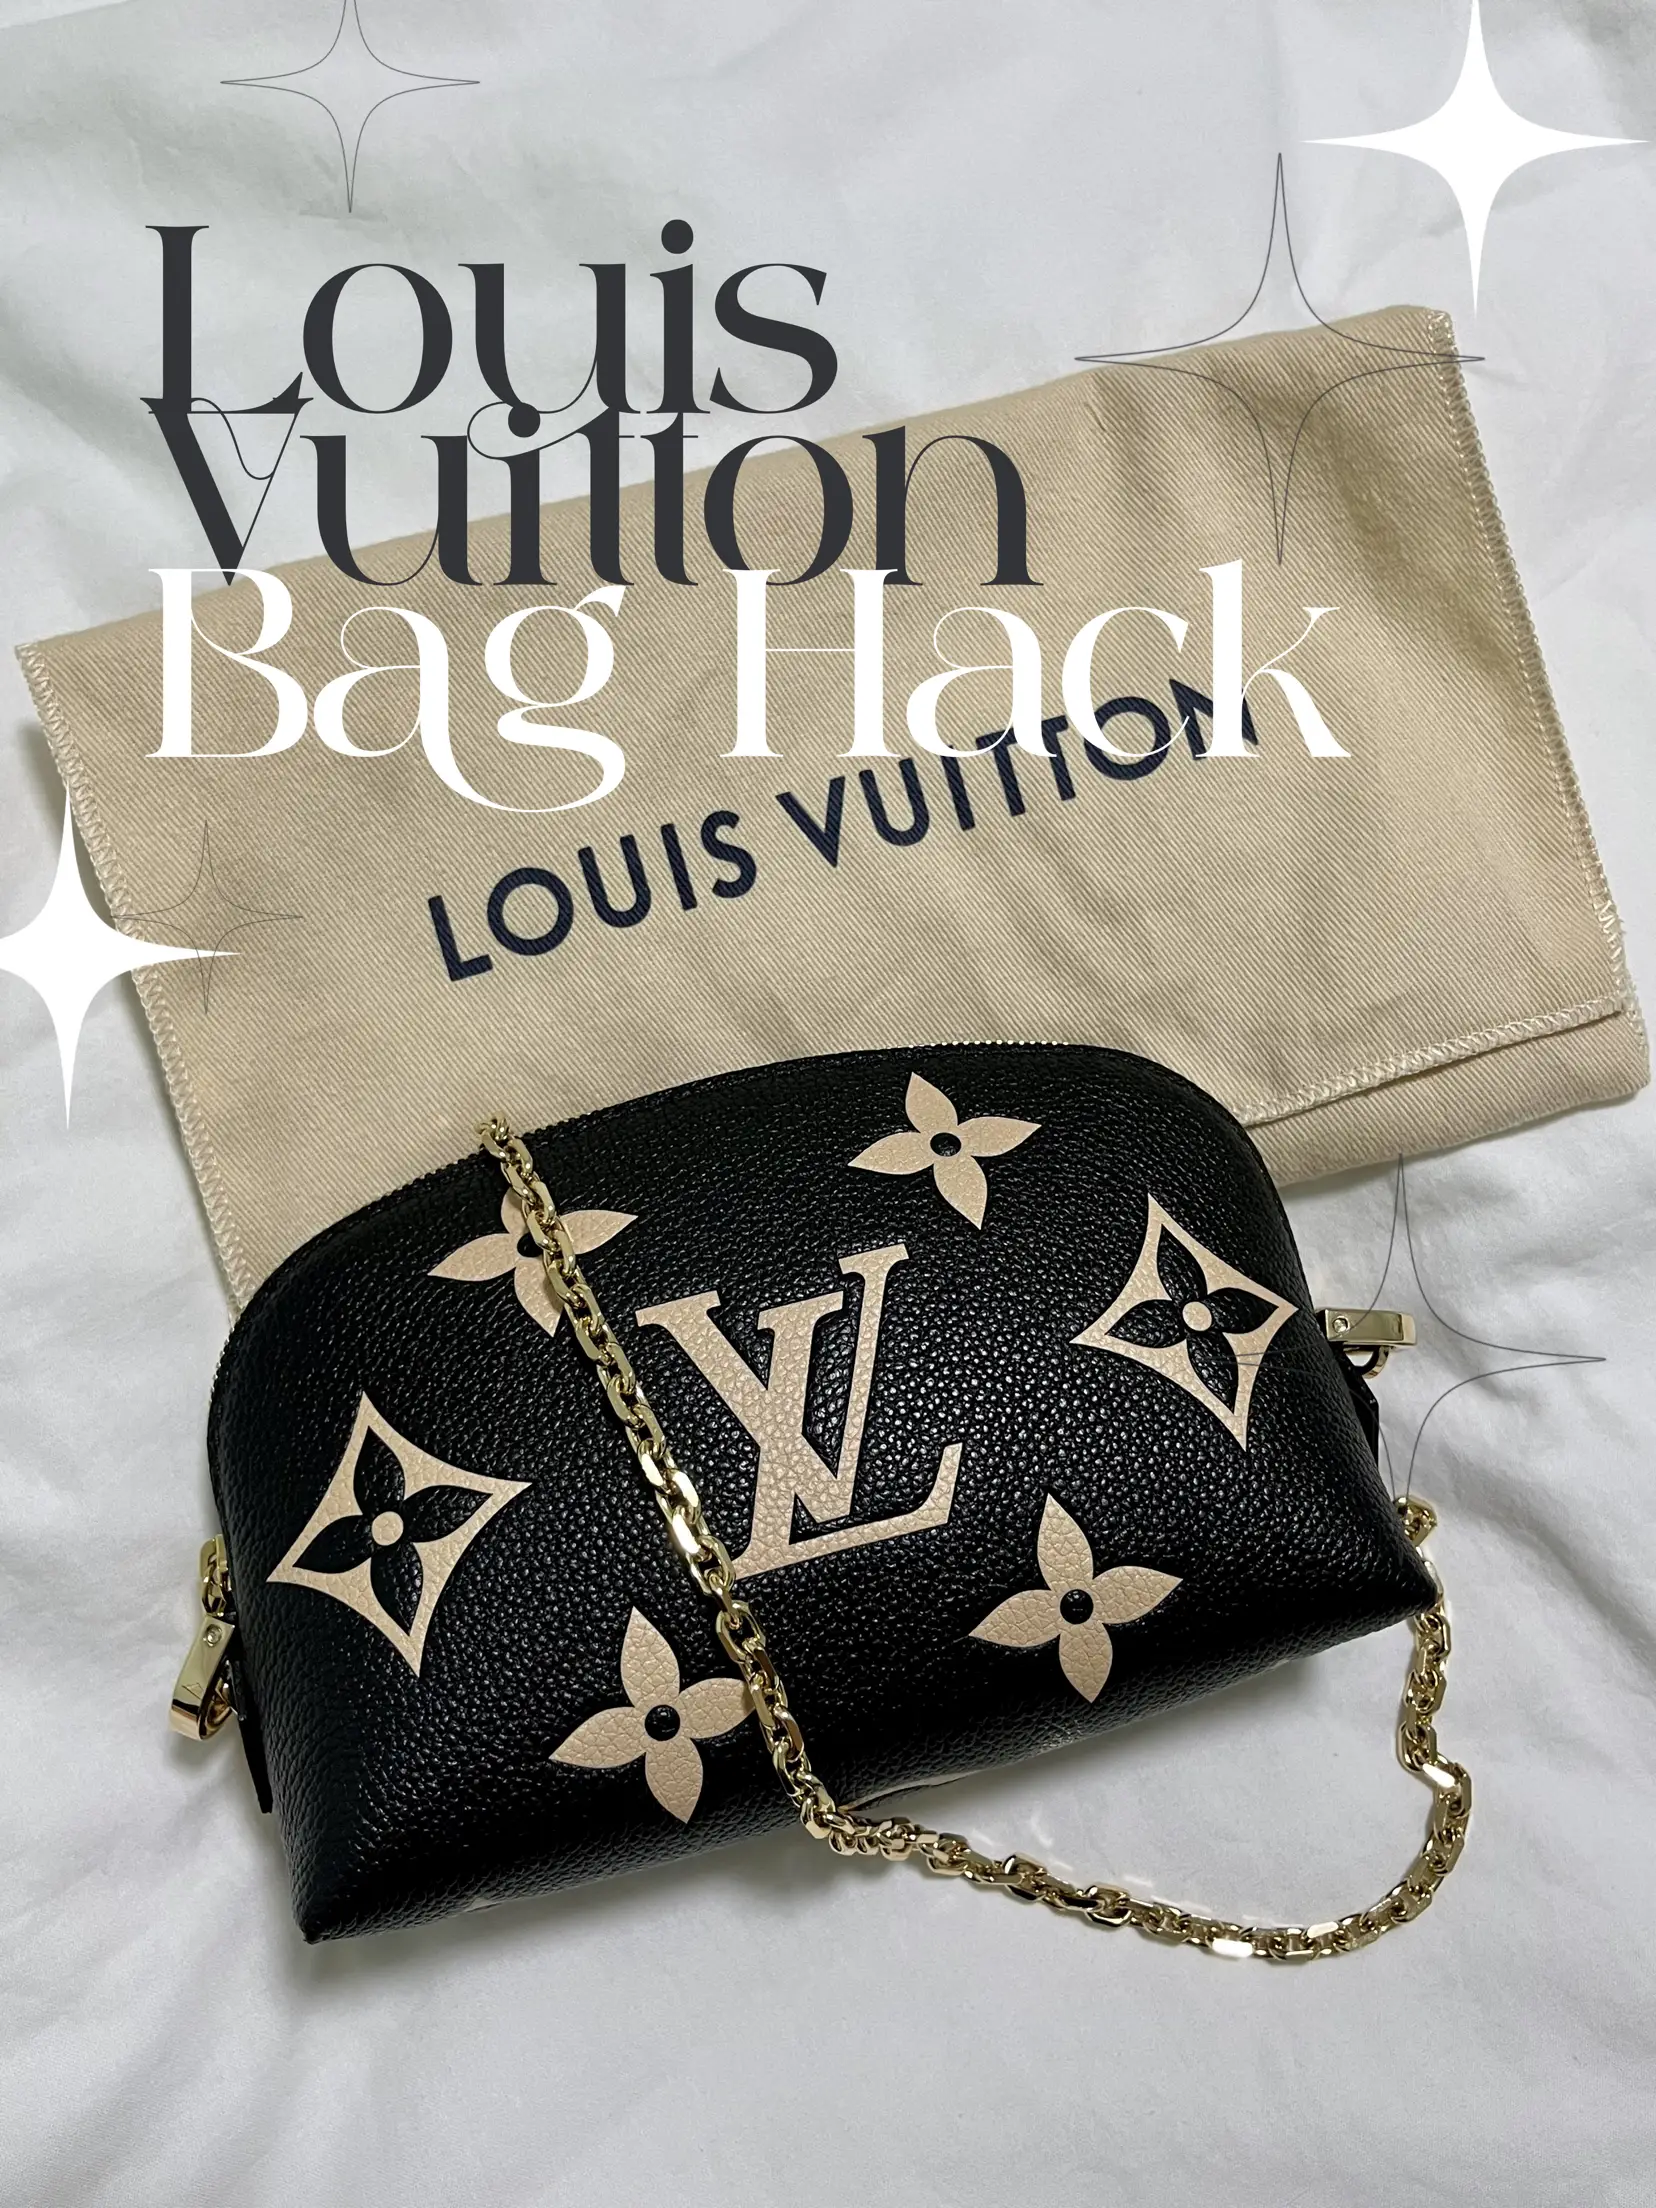 New Louis Vuitton paint cans, text now to purchase #louisvuitton